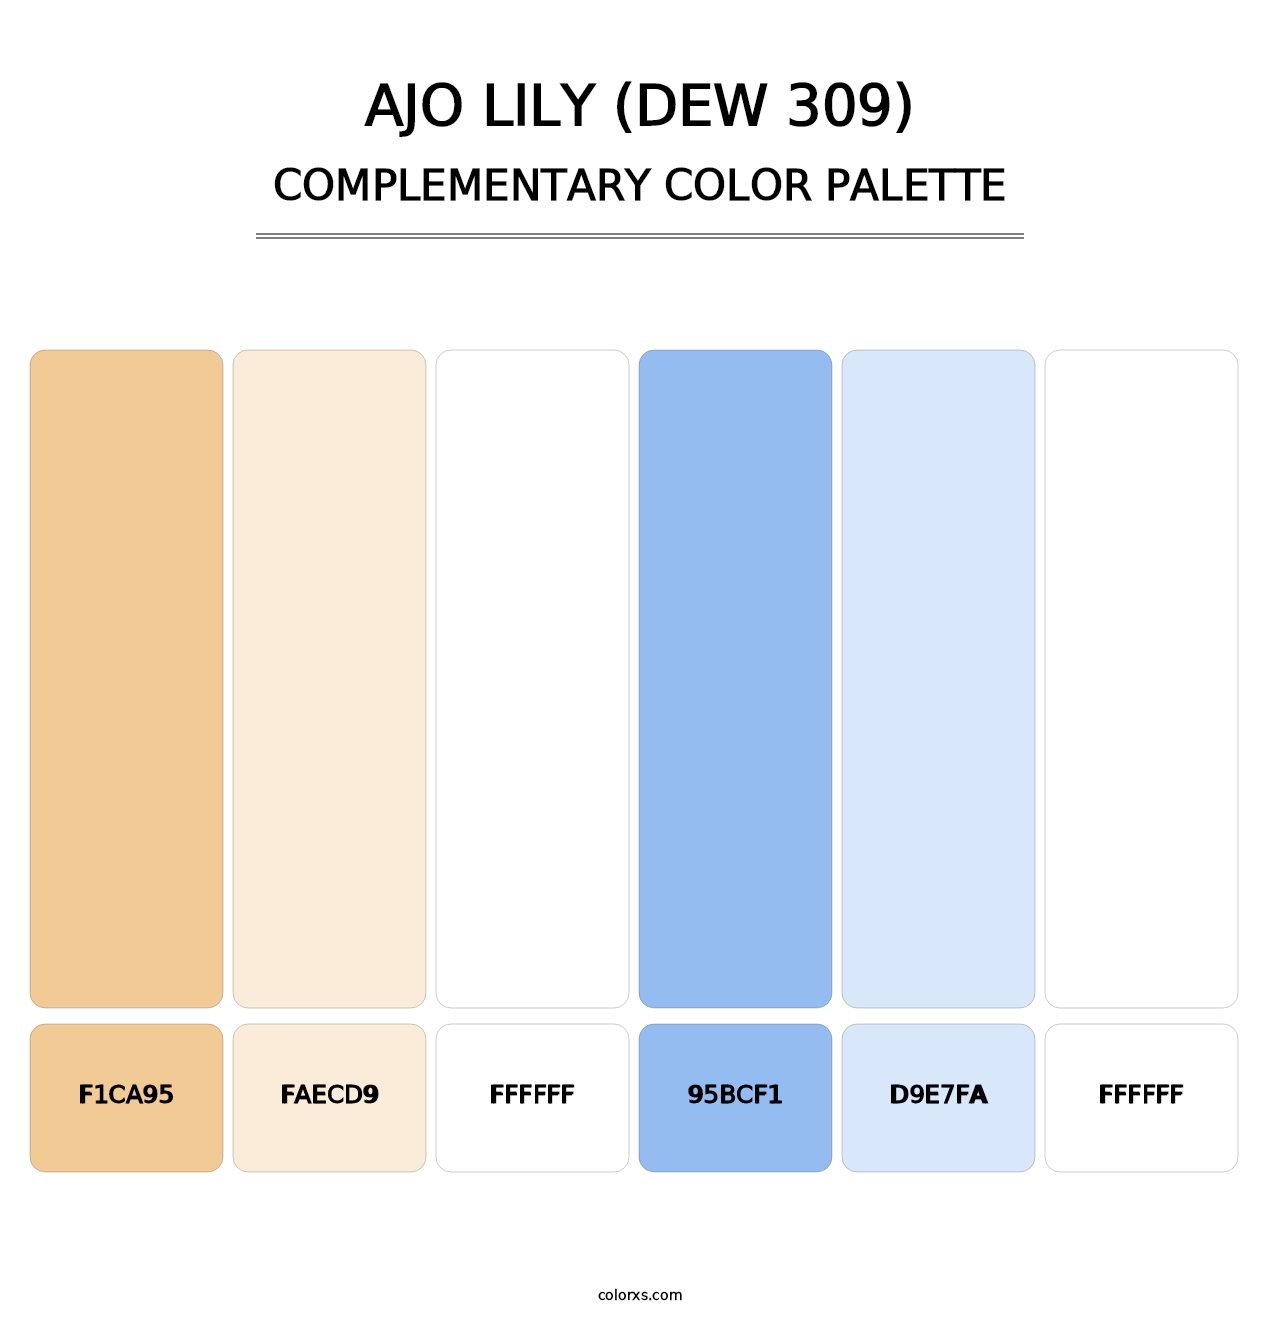 Ajo Lily (DEW 309) - Complementary Color Palette